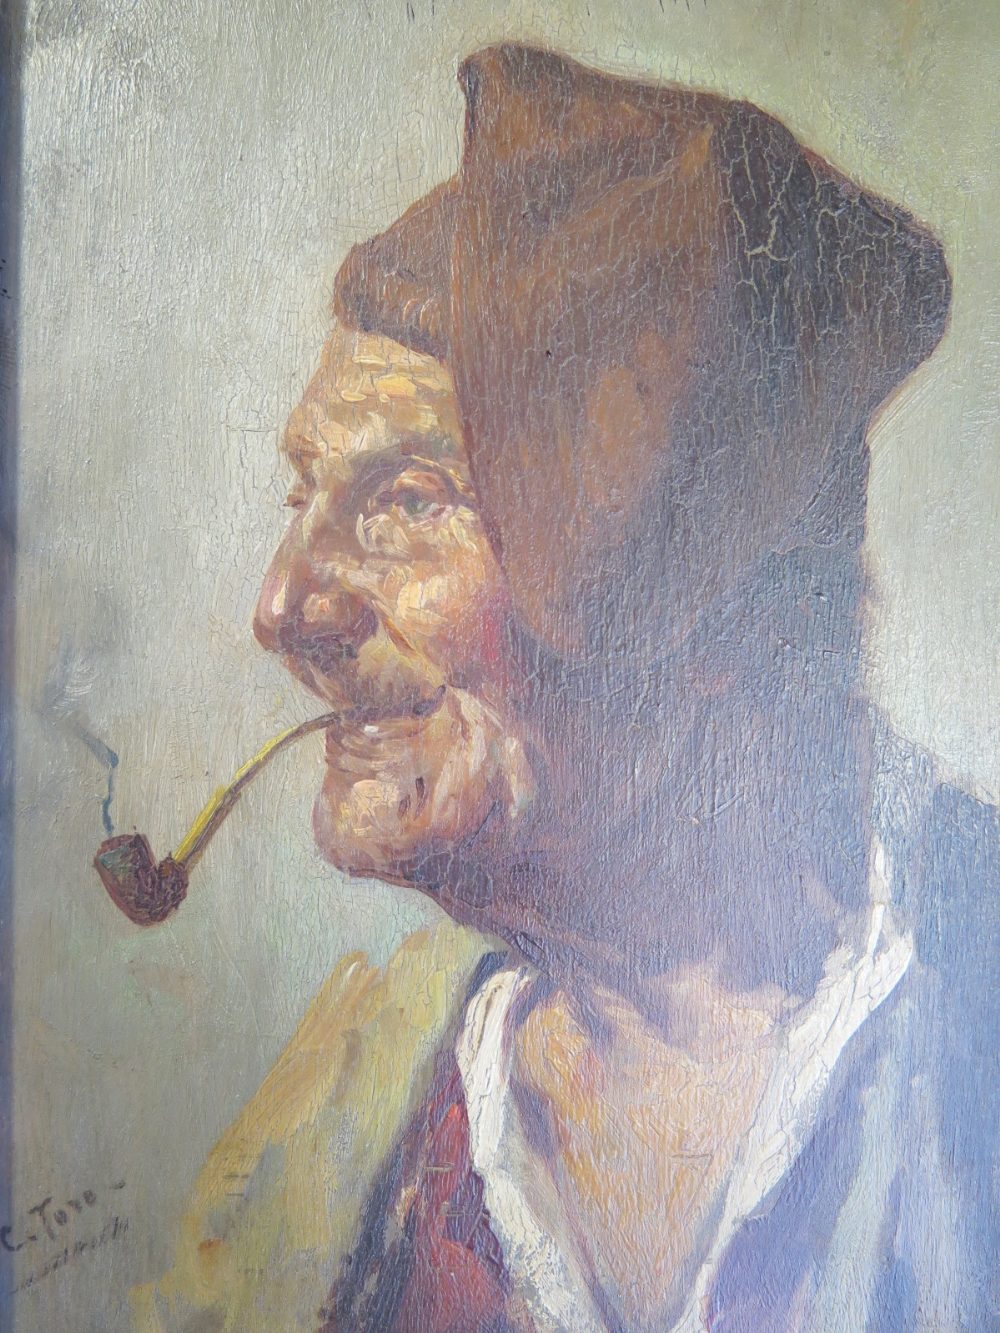 C. Tore?, Portrait of Man with Pipe, oil on panel, Southern European, 21 x 14cm - Image 2 of 3